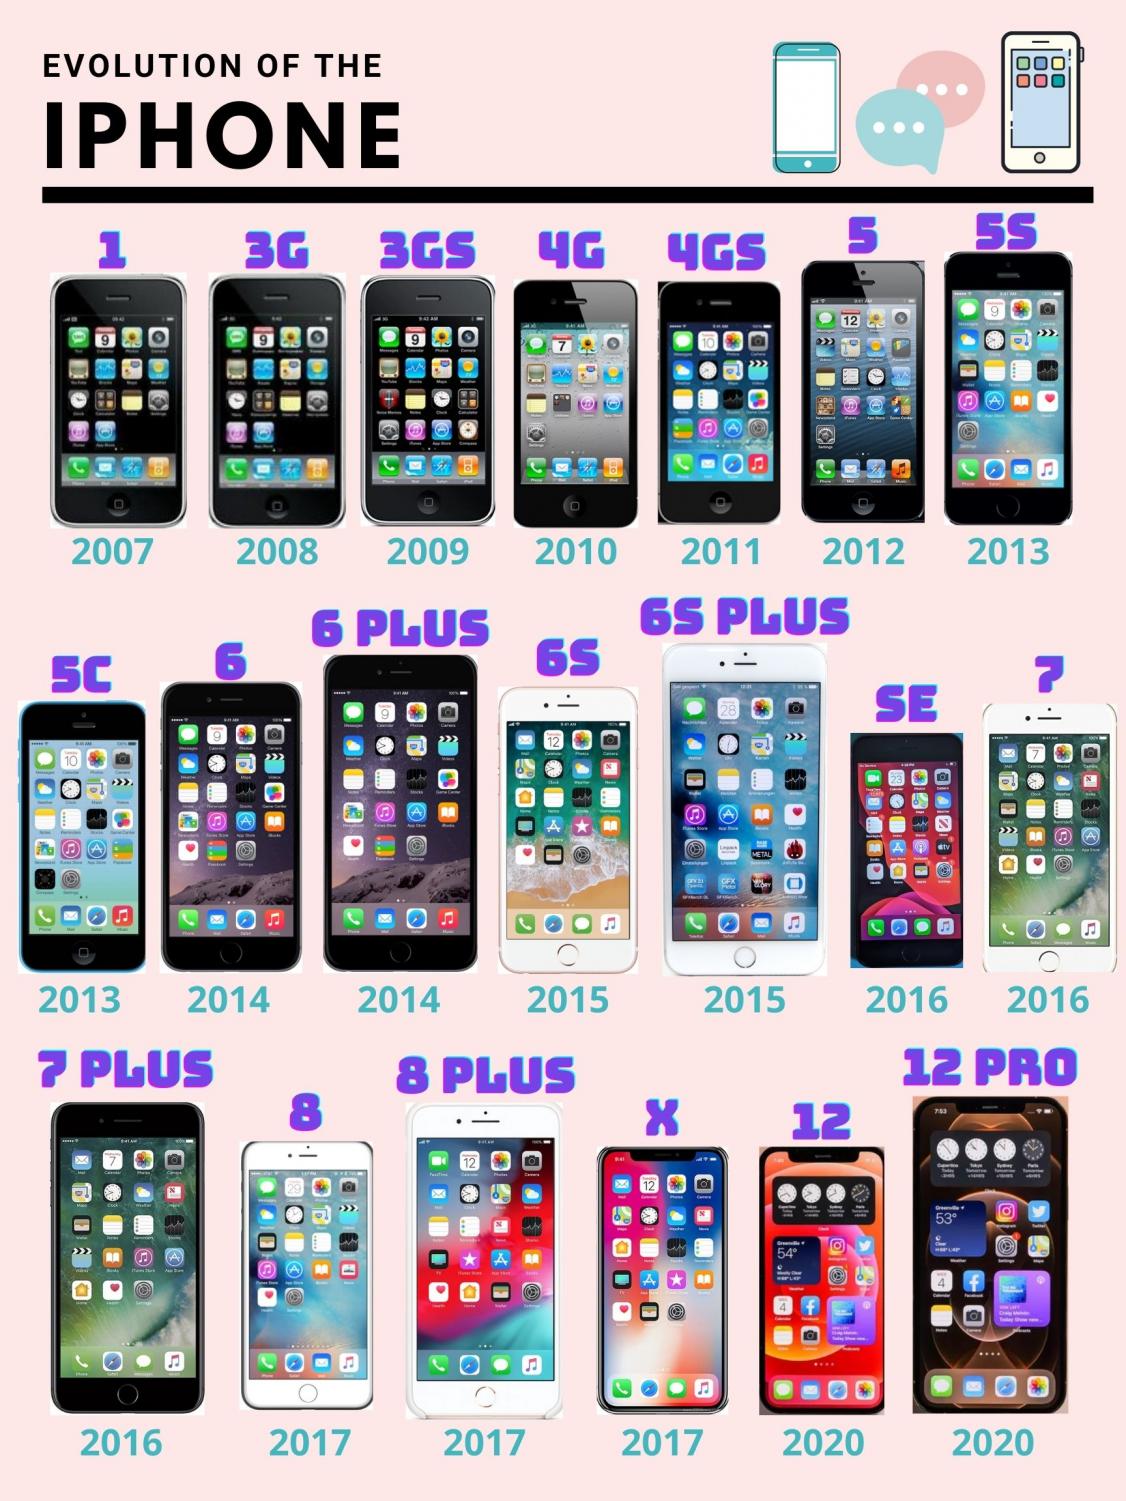 newest iphone models in order